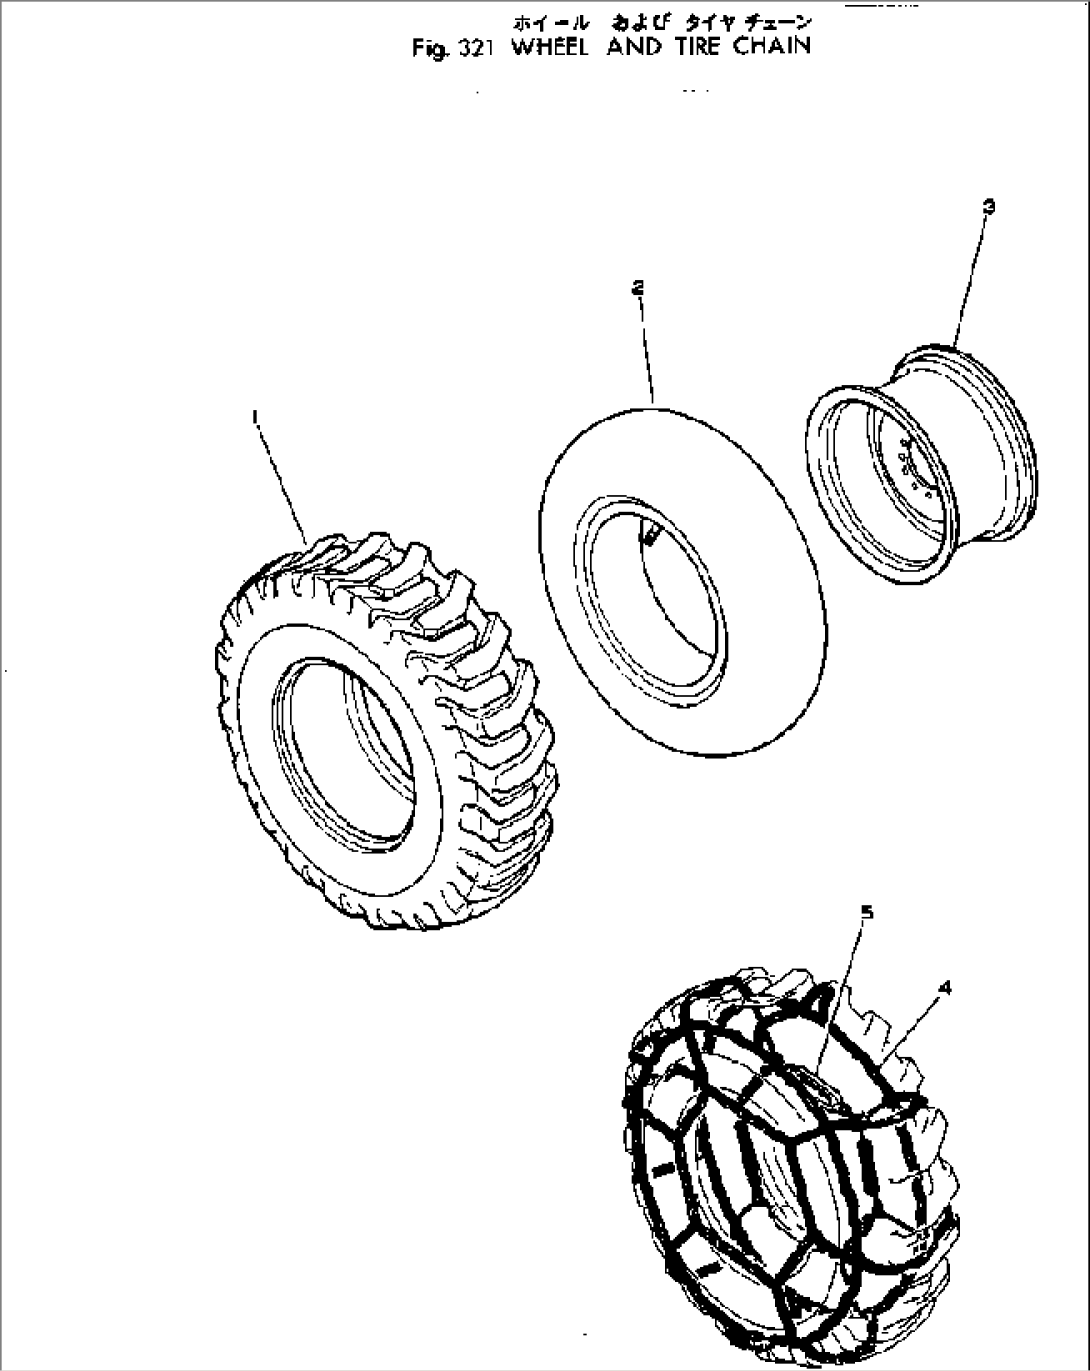 WHEEL AND TIRE CHAIN